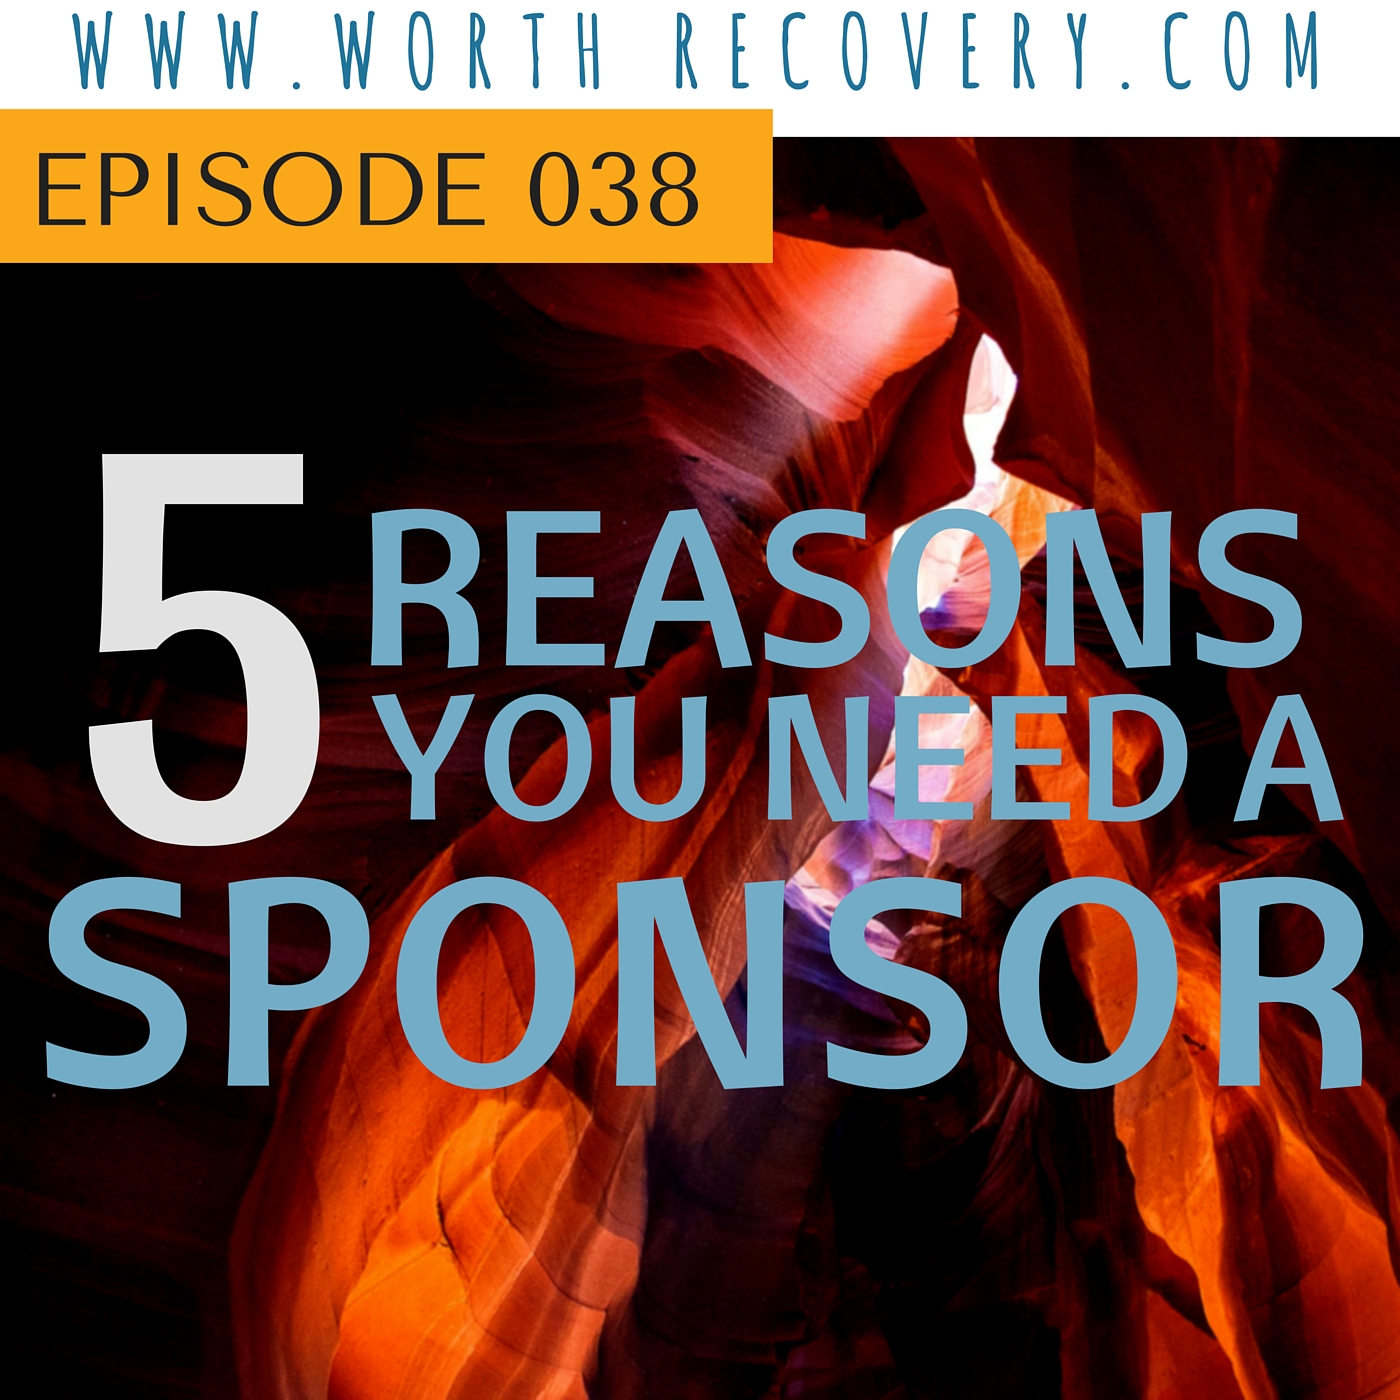 Episode 038:  The 5 Reasons You Need A Sponsor